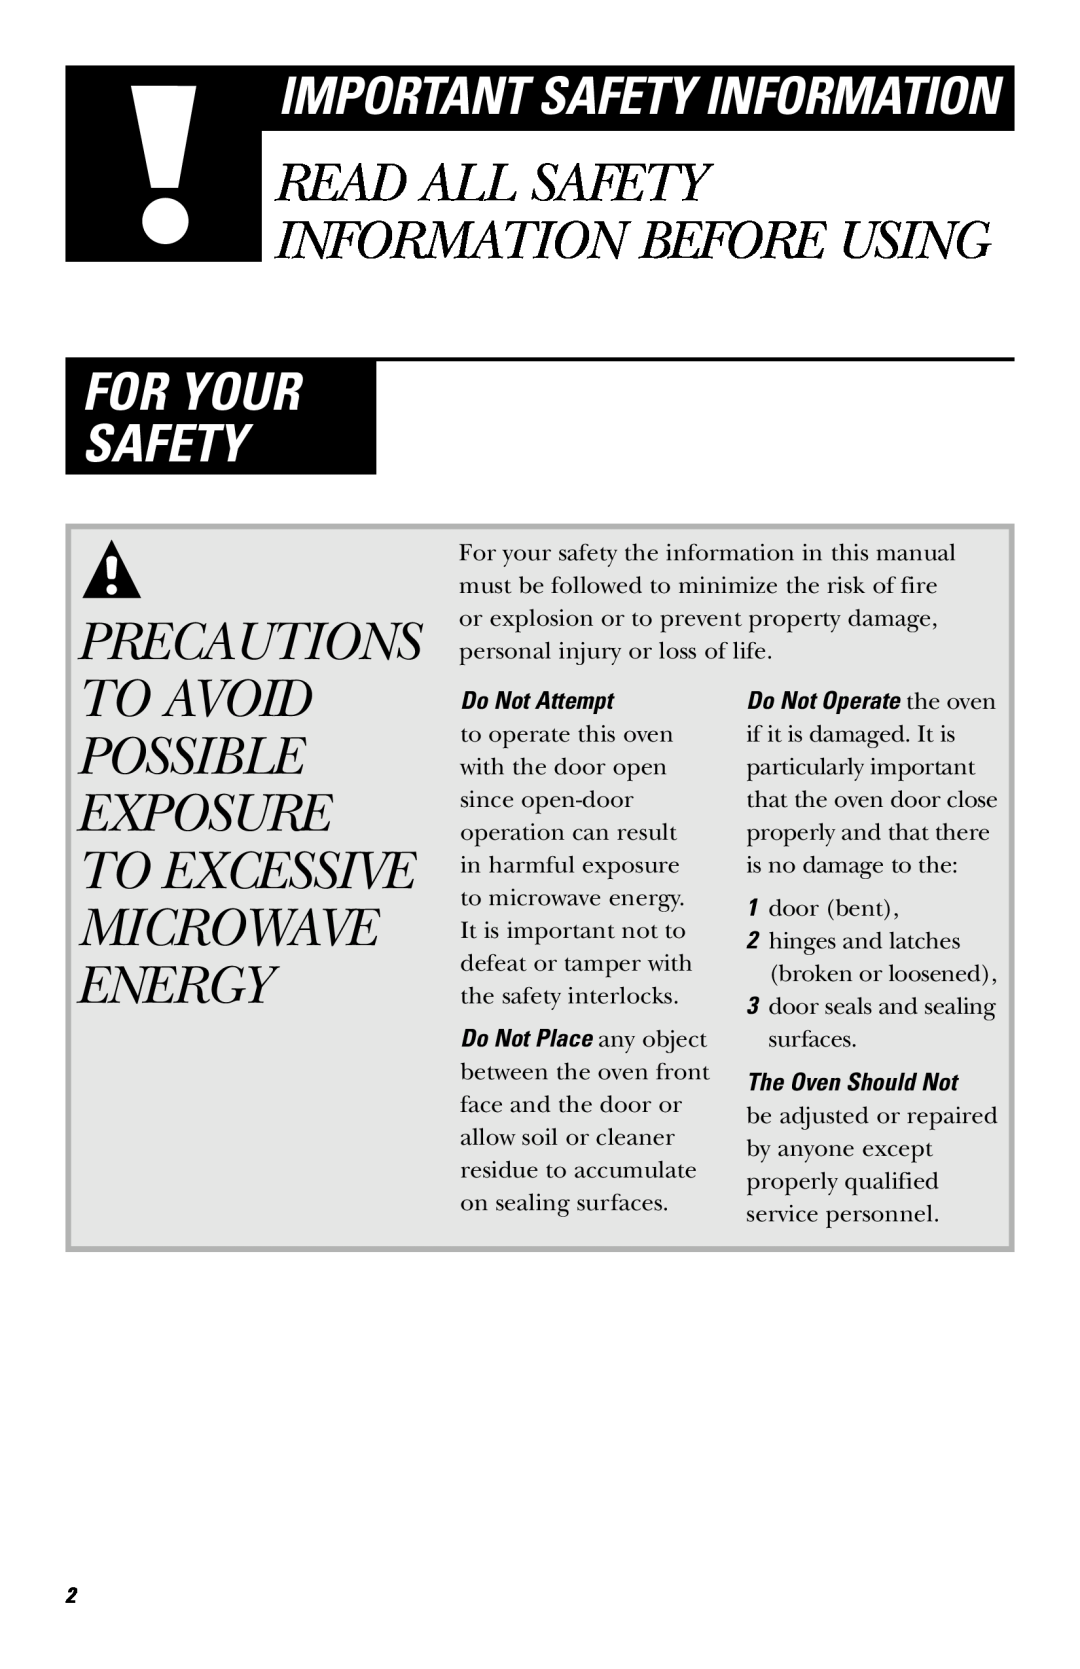 GE JE740 Precautions, To Avoid Possible, Important Safety Information, Read All Safety Information Before Using 